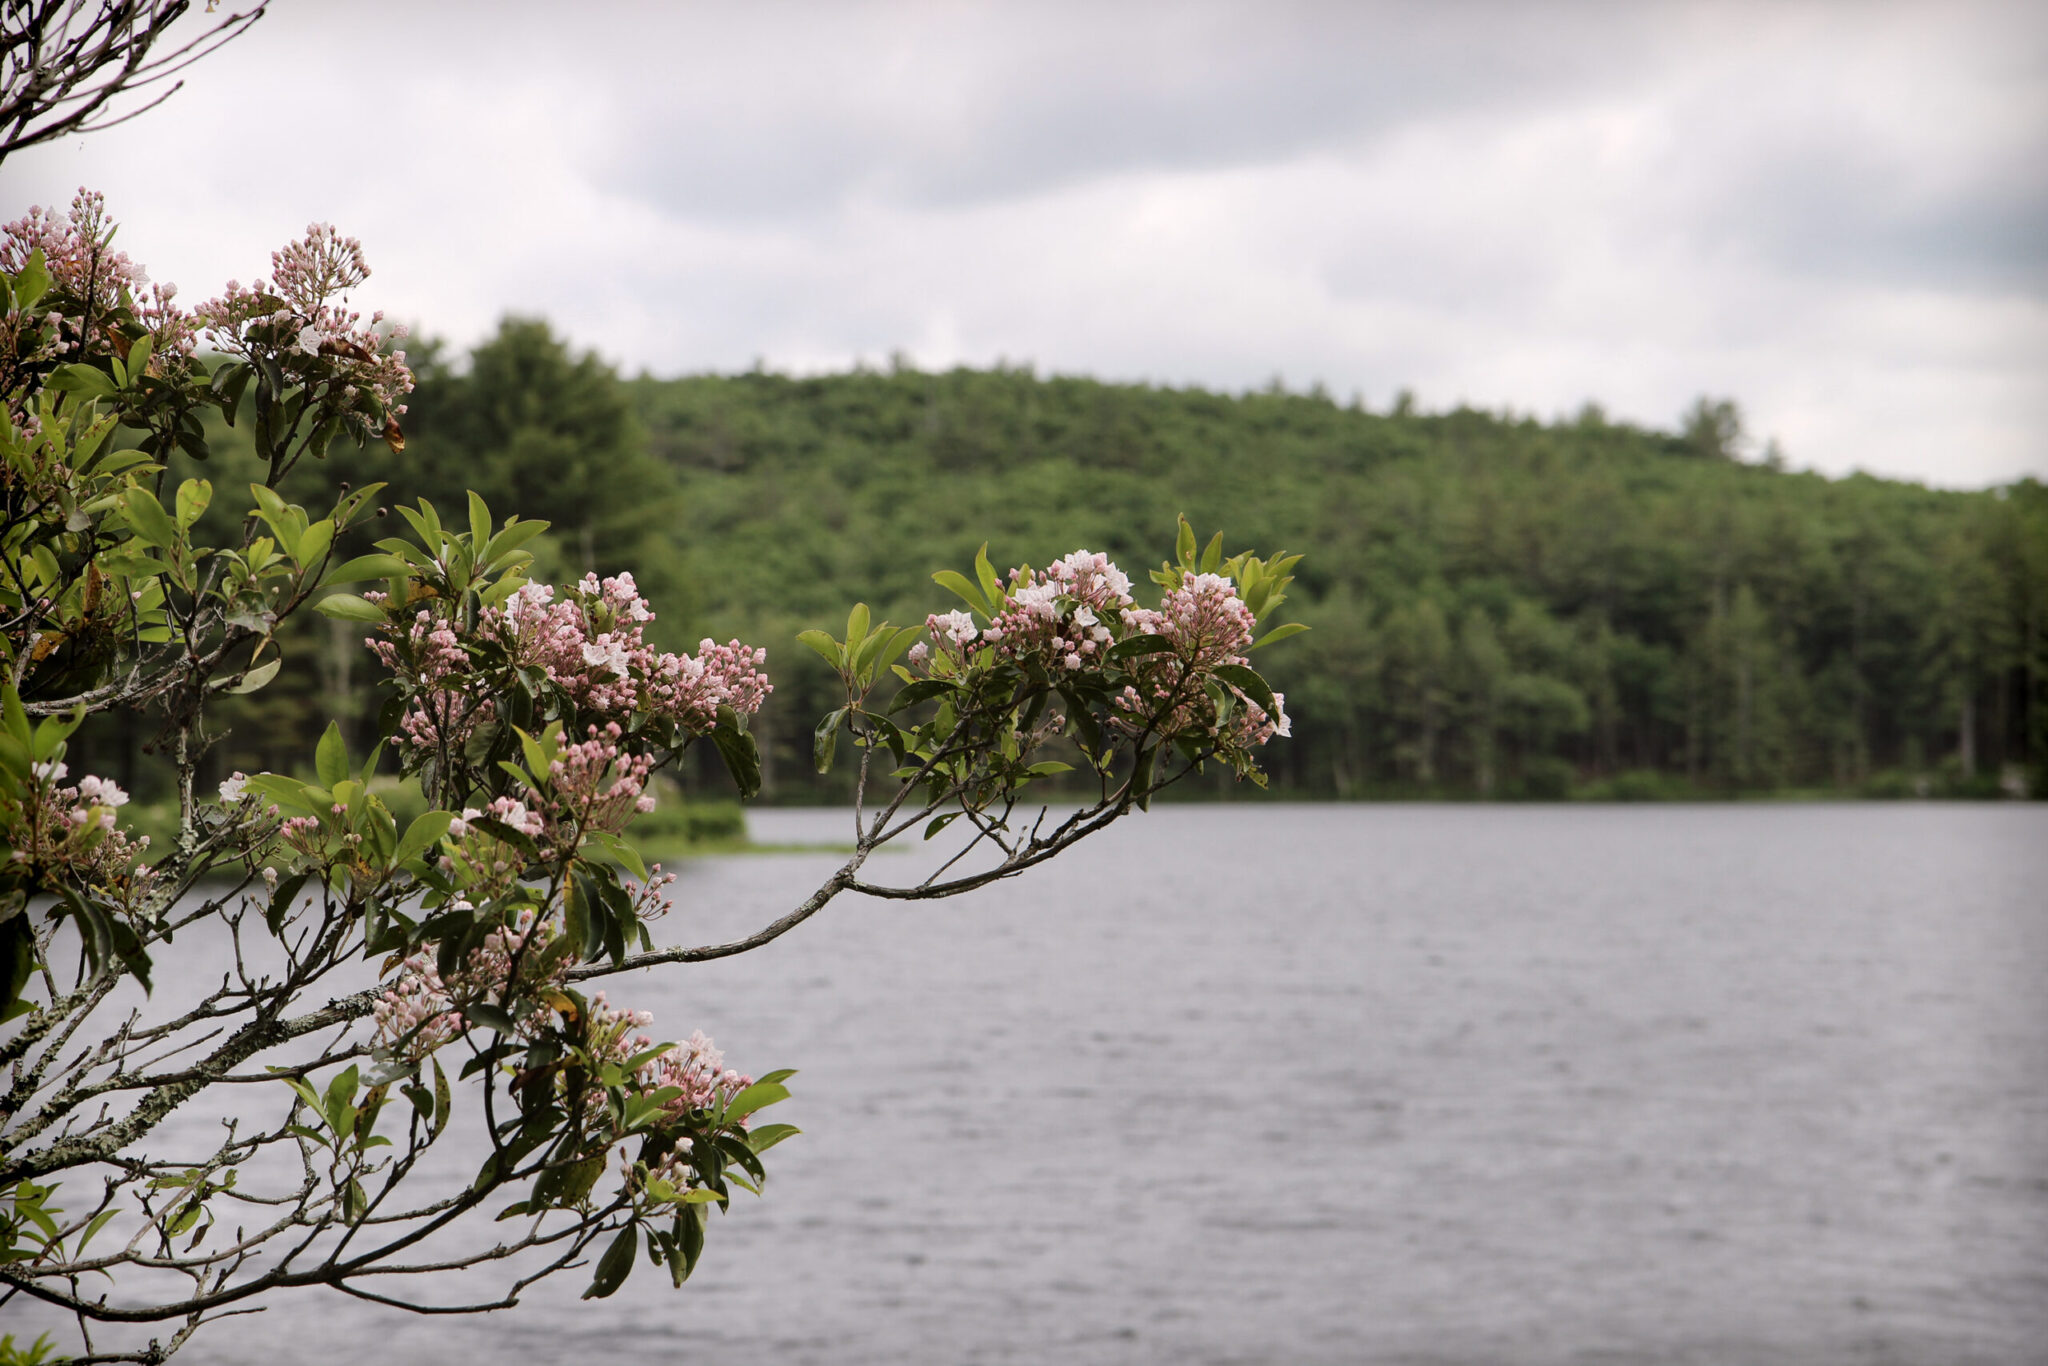 mountain laurel flowers in front of a lake